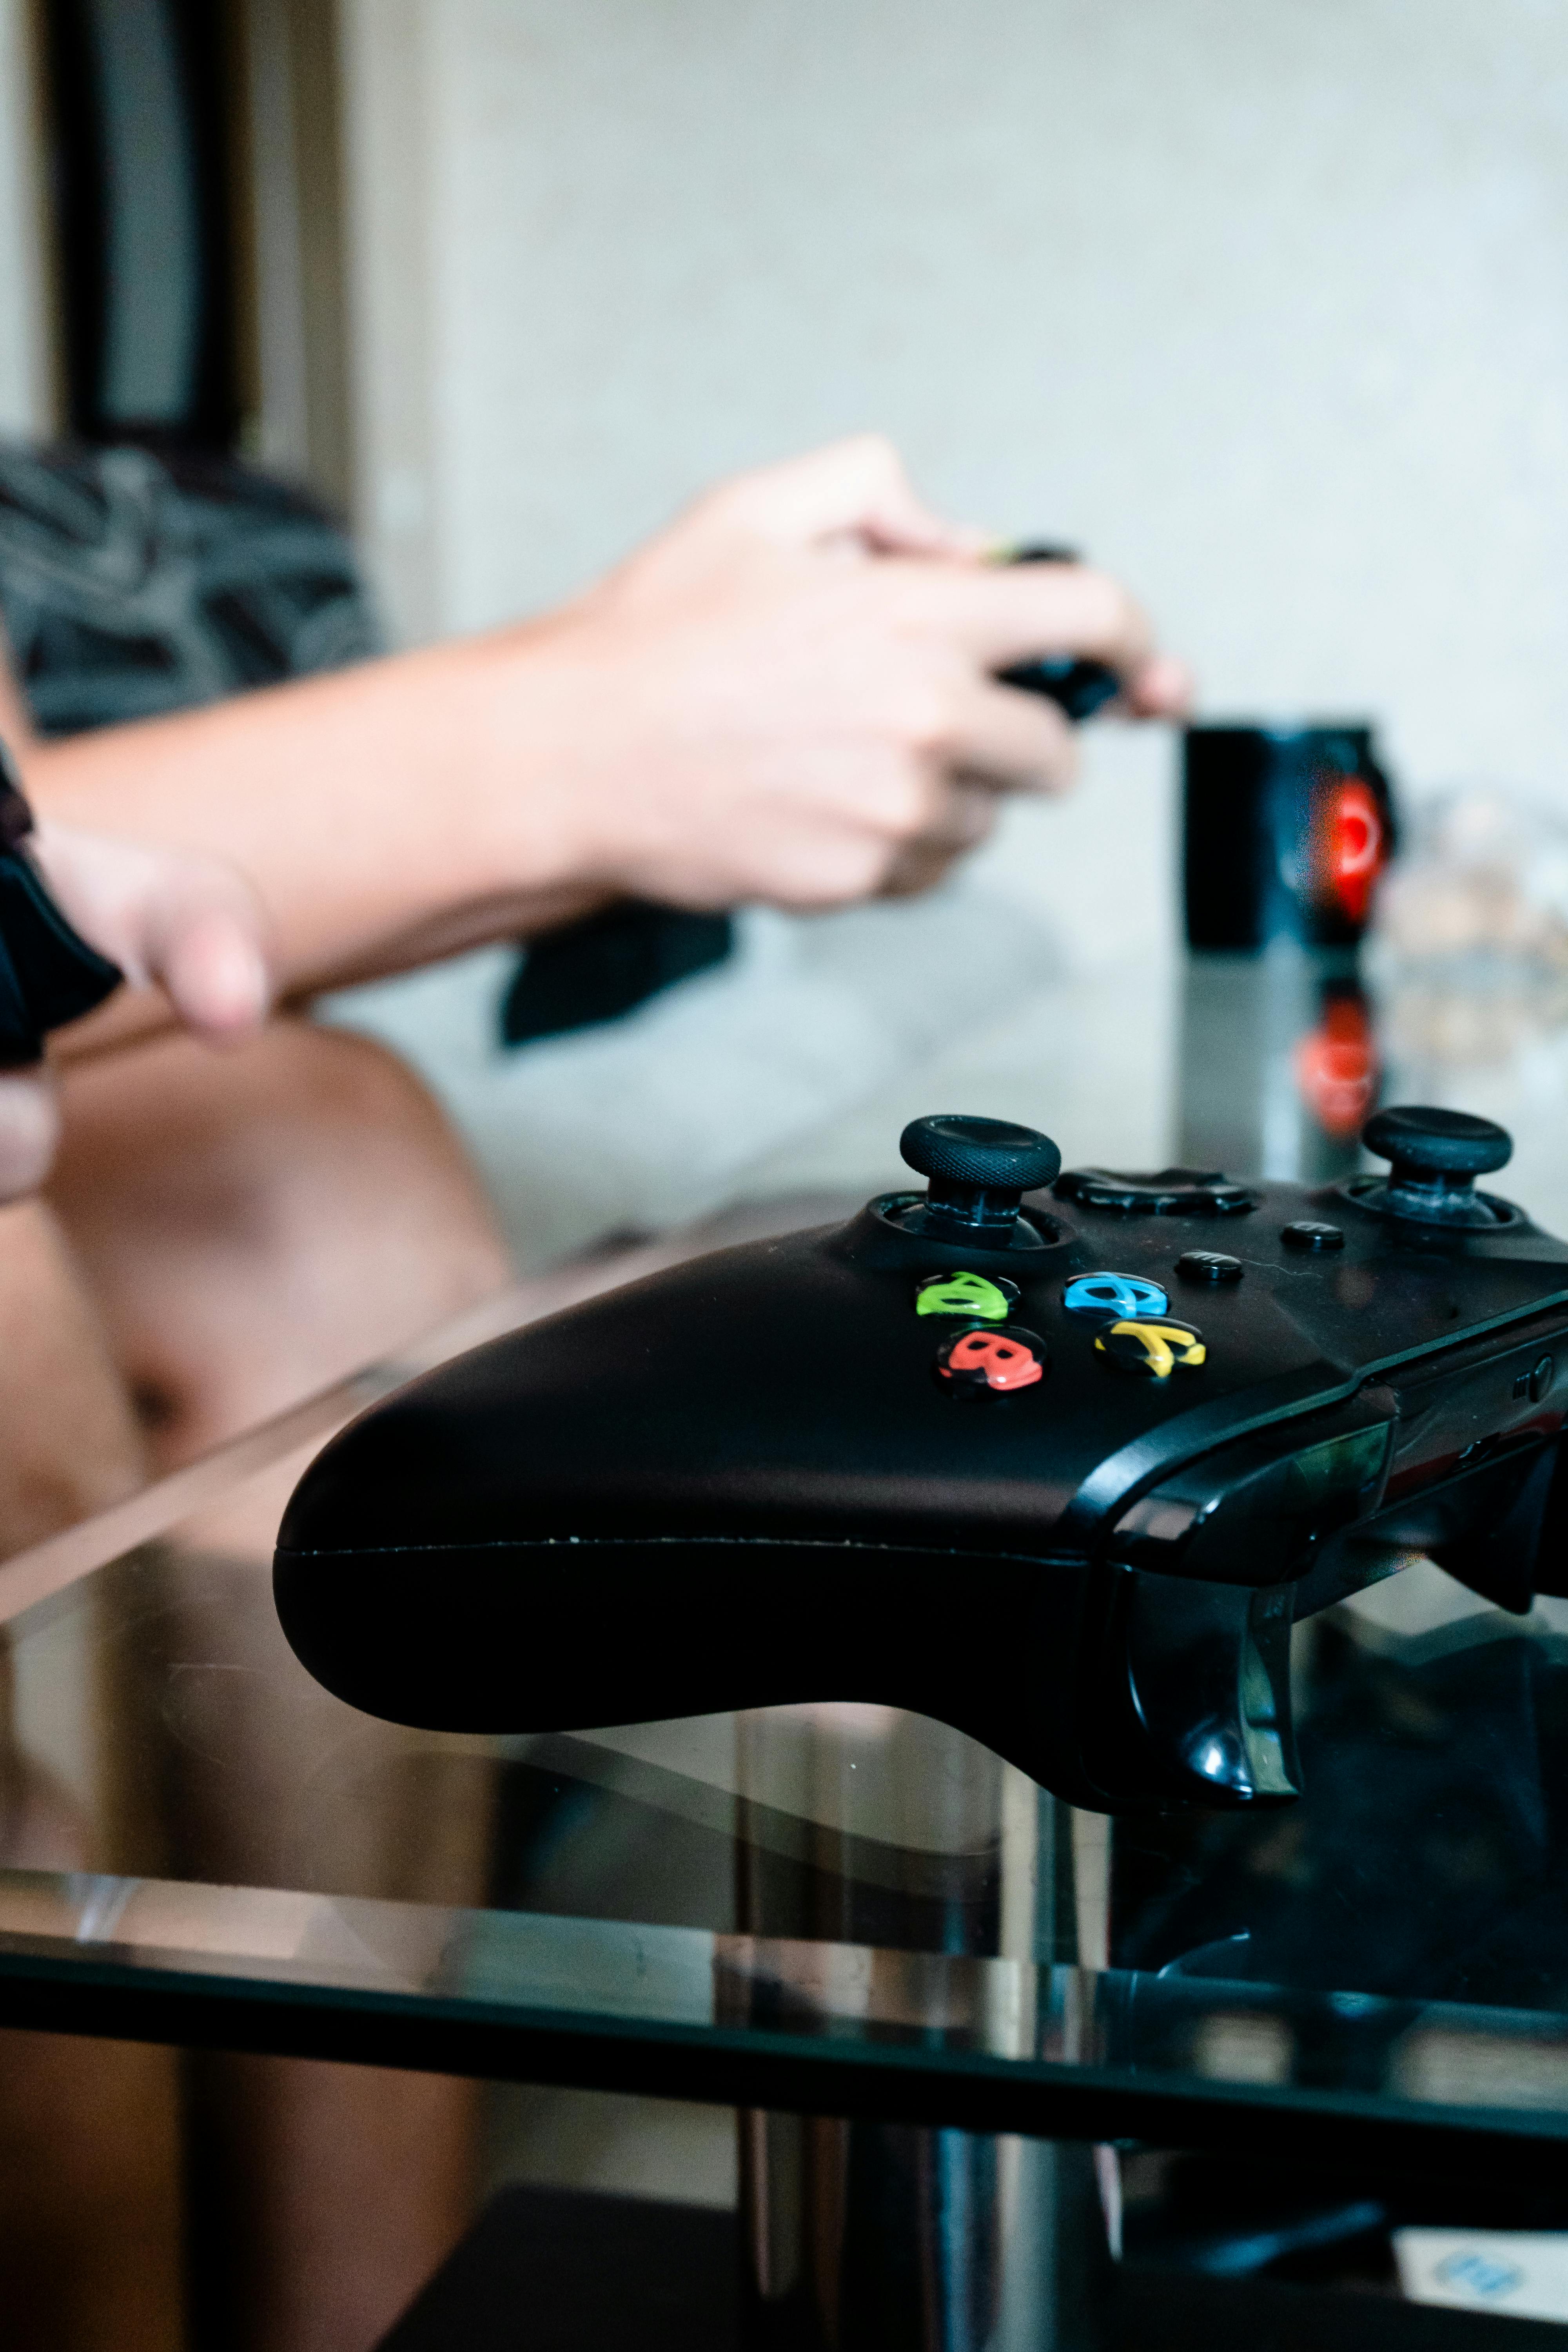 A Xbox controller on the table. | Source: Pexels